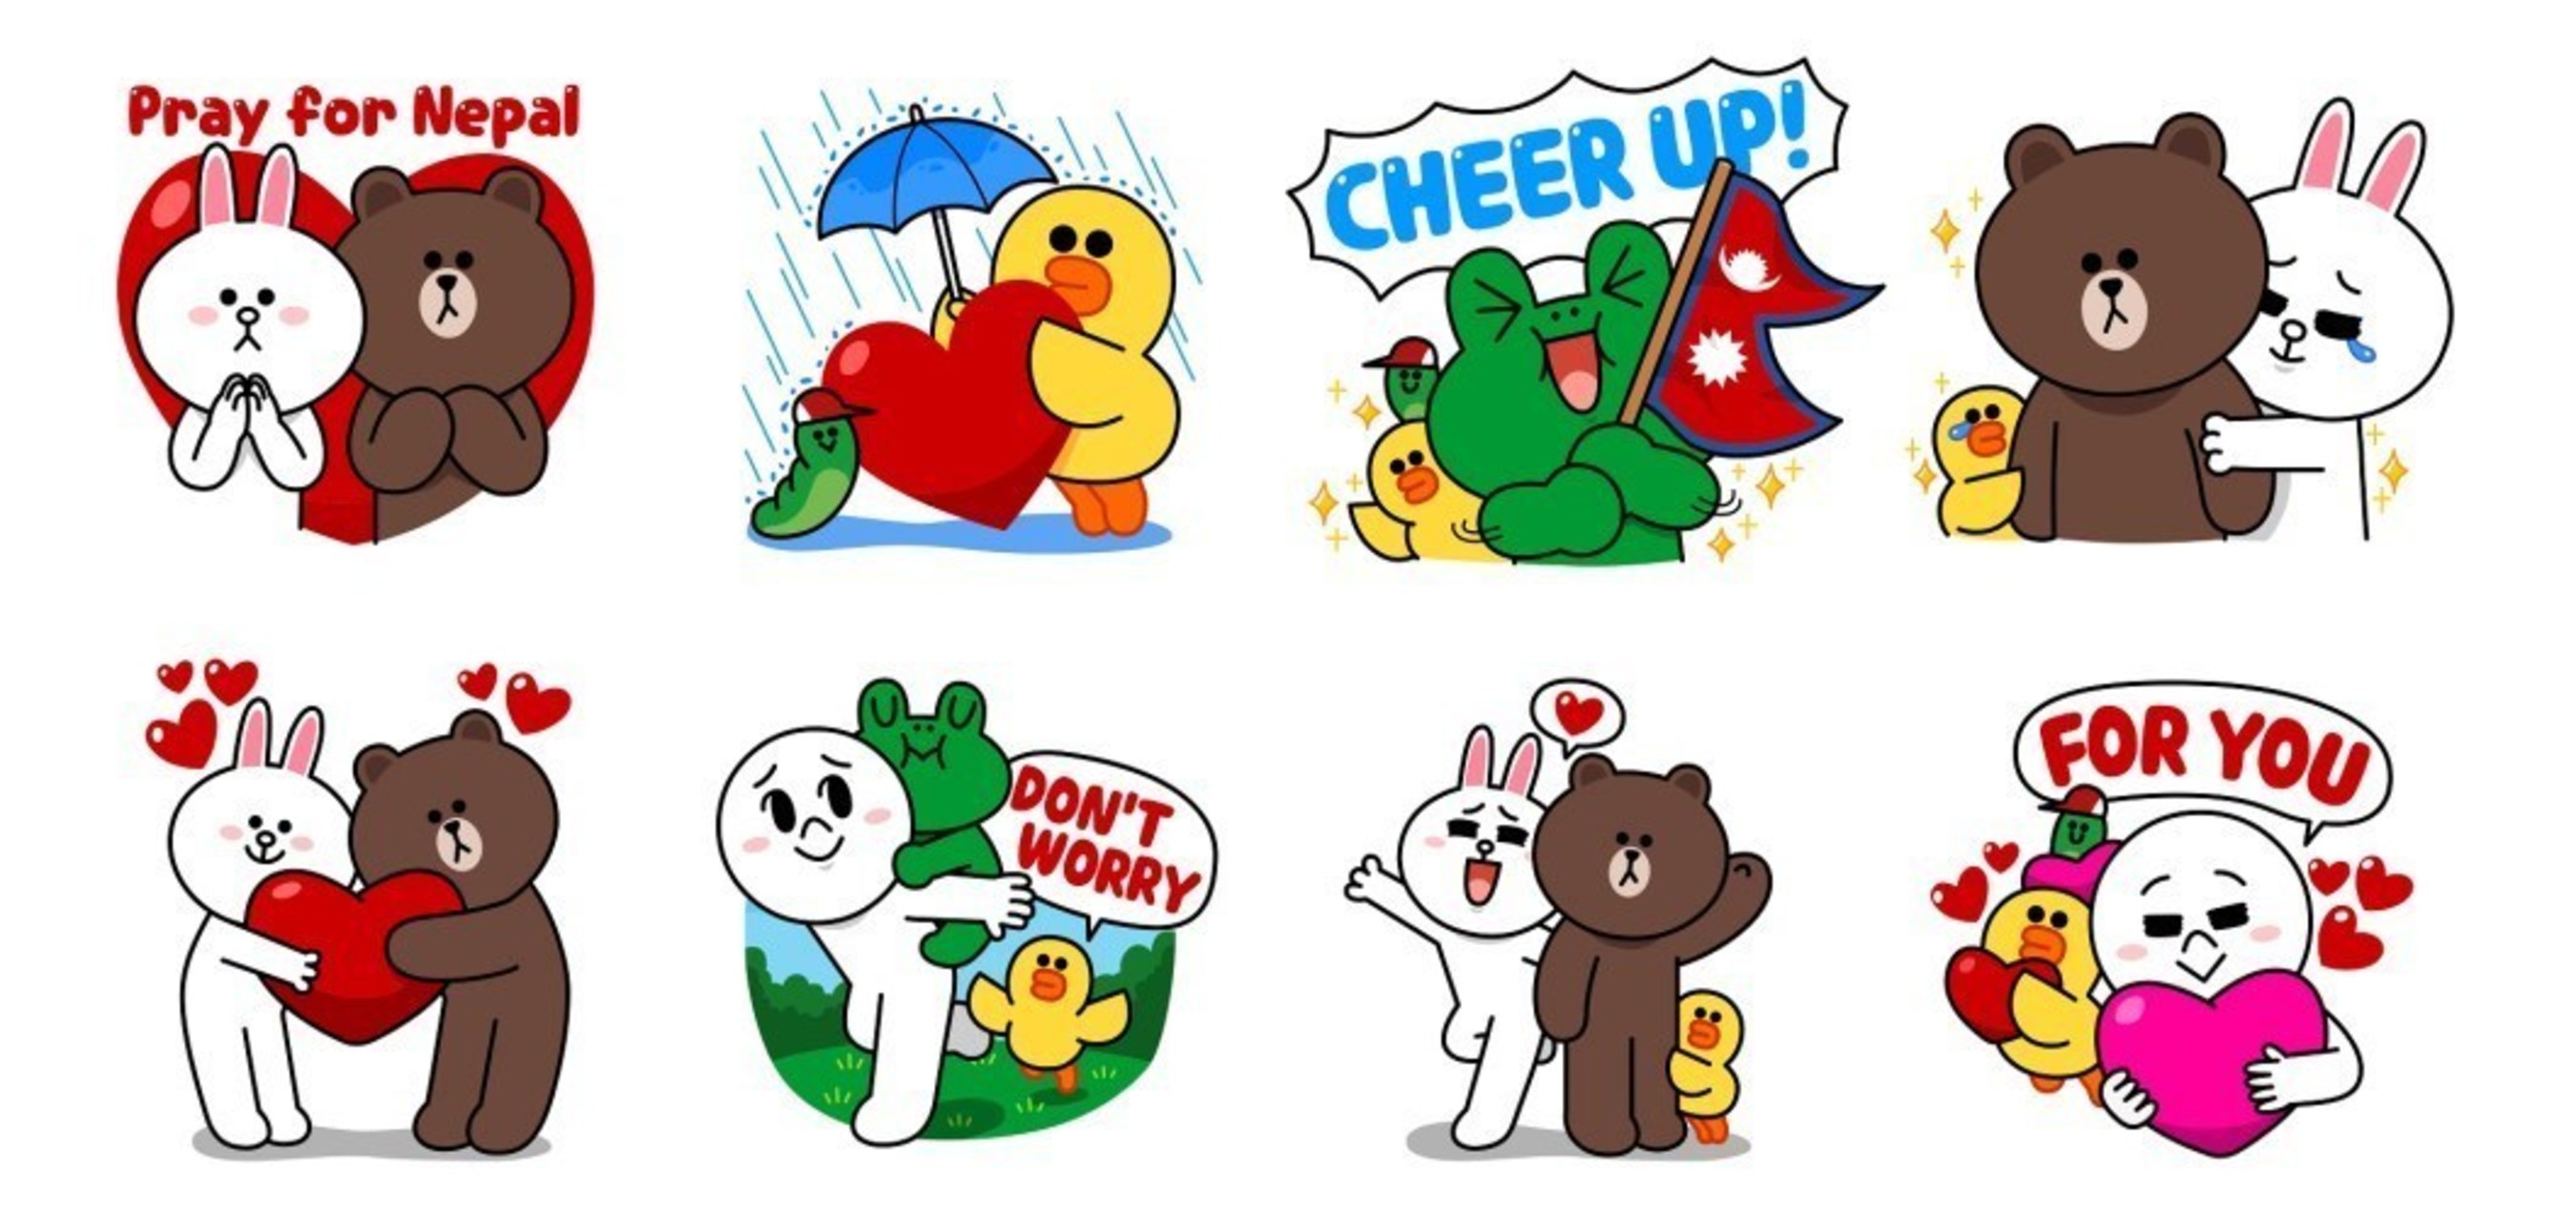 LINE Releases Charity Stickers "Pray for Nepal" Worldwide to Aid Victims of Nepal Earthquake